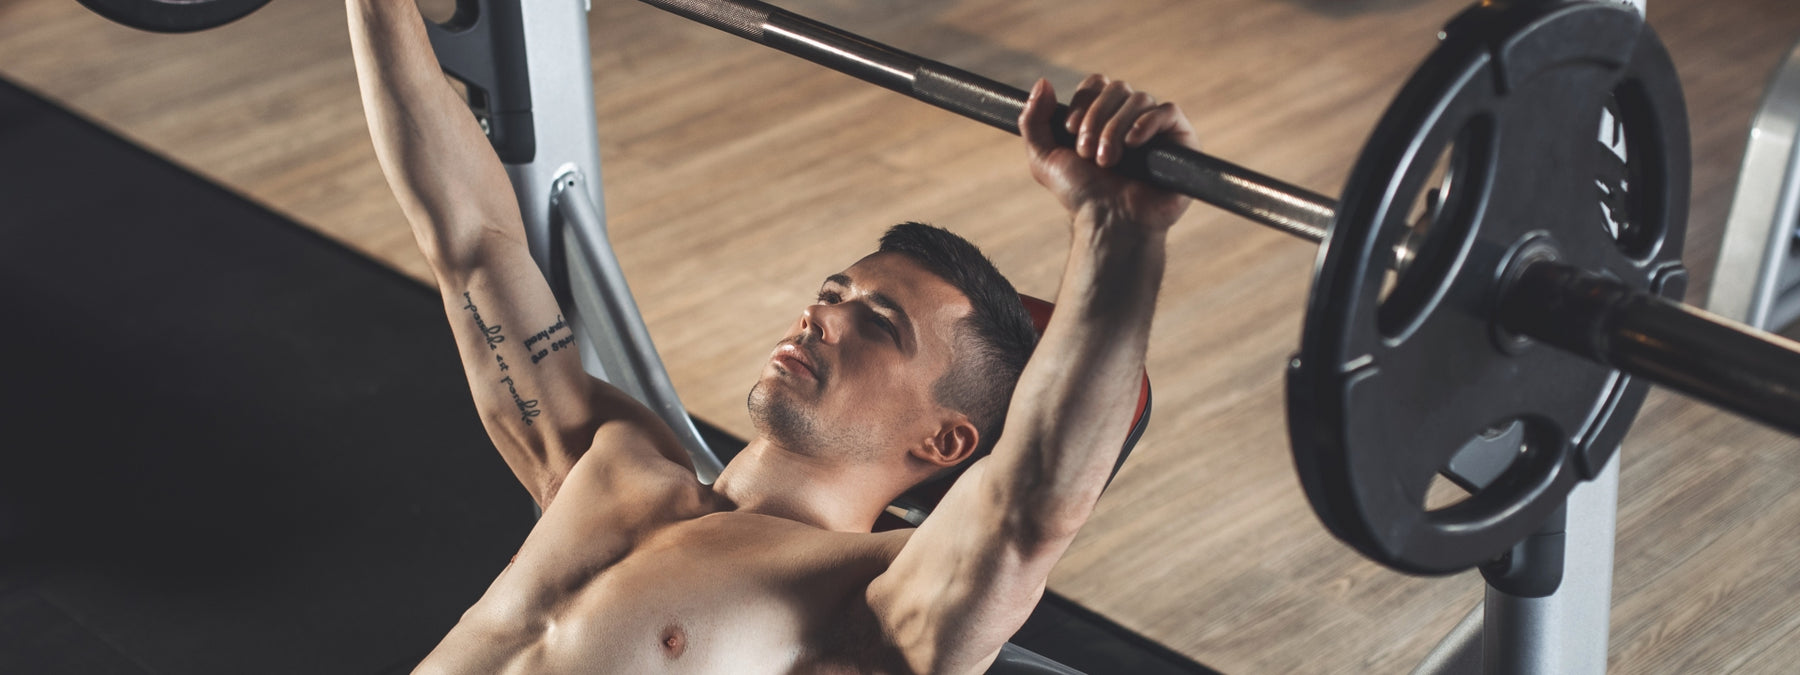 Bench Press Calculator - Find Out Your One Rep Max